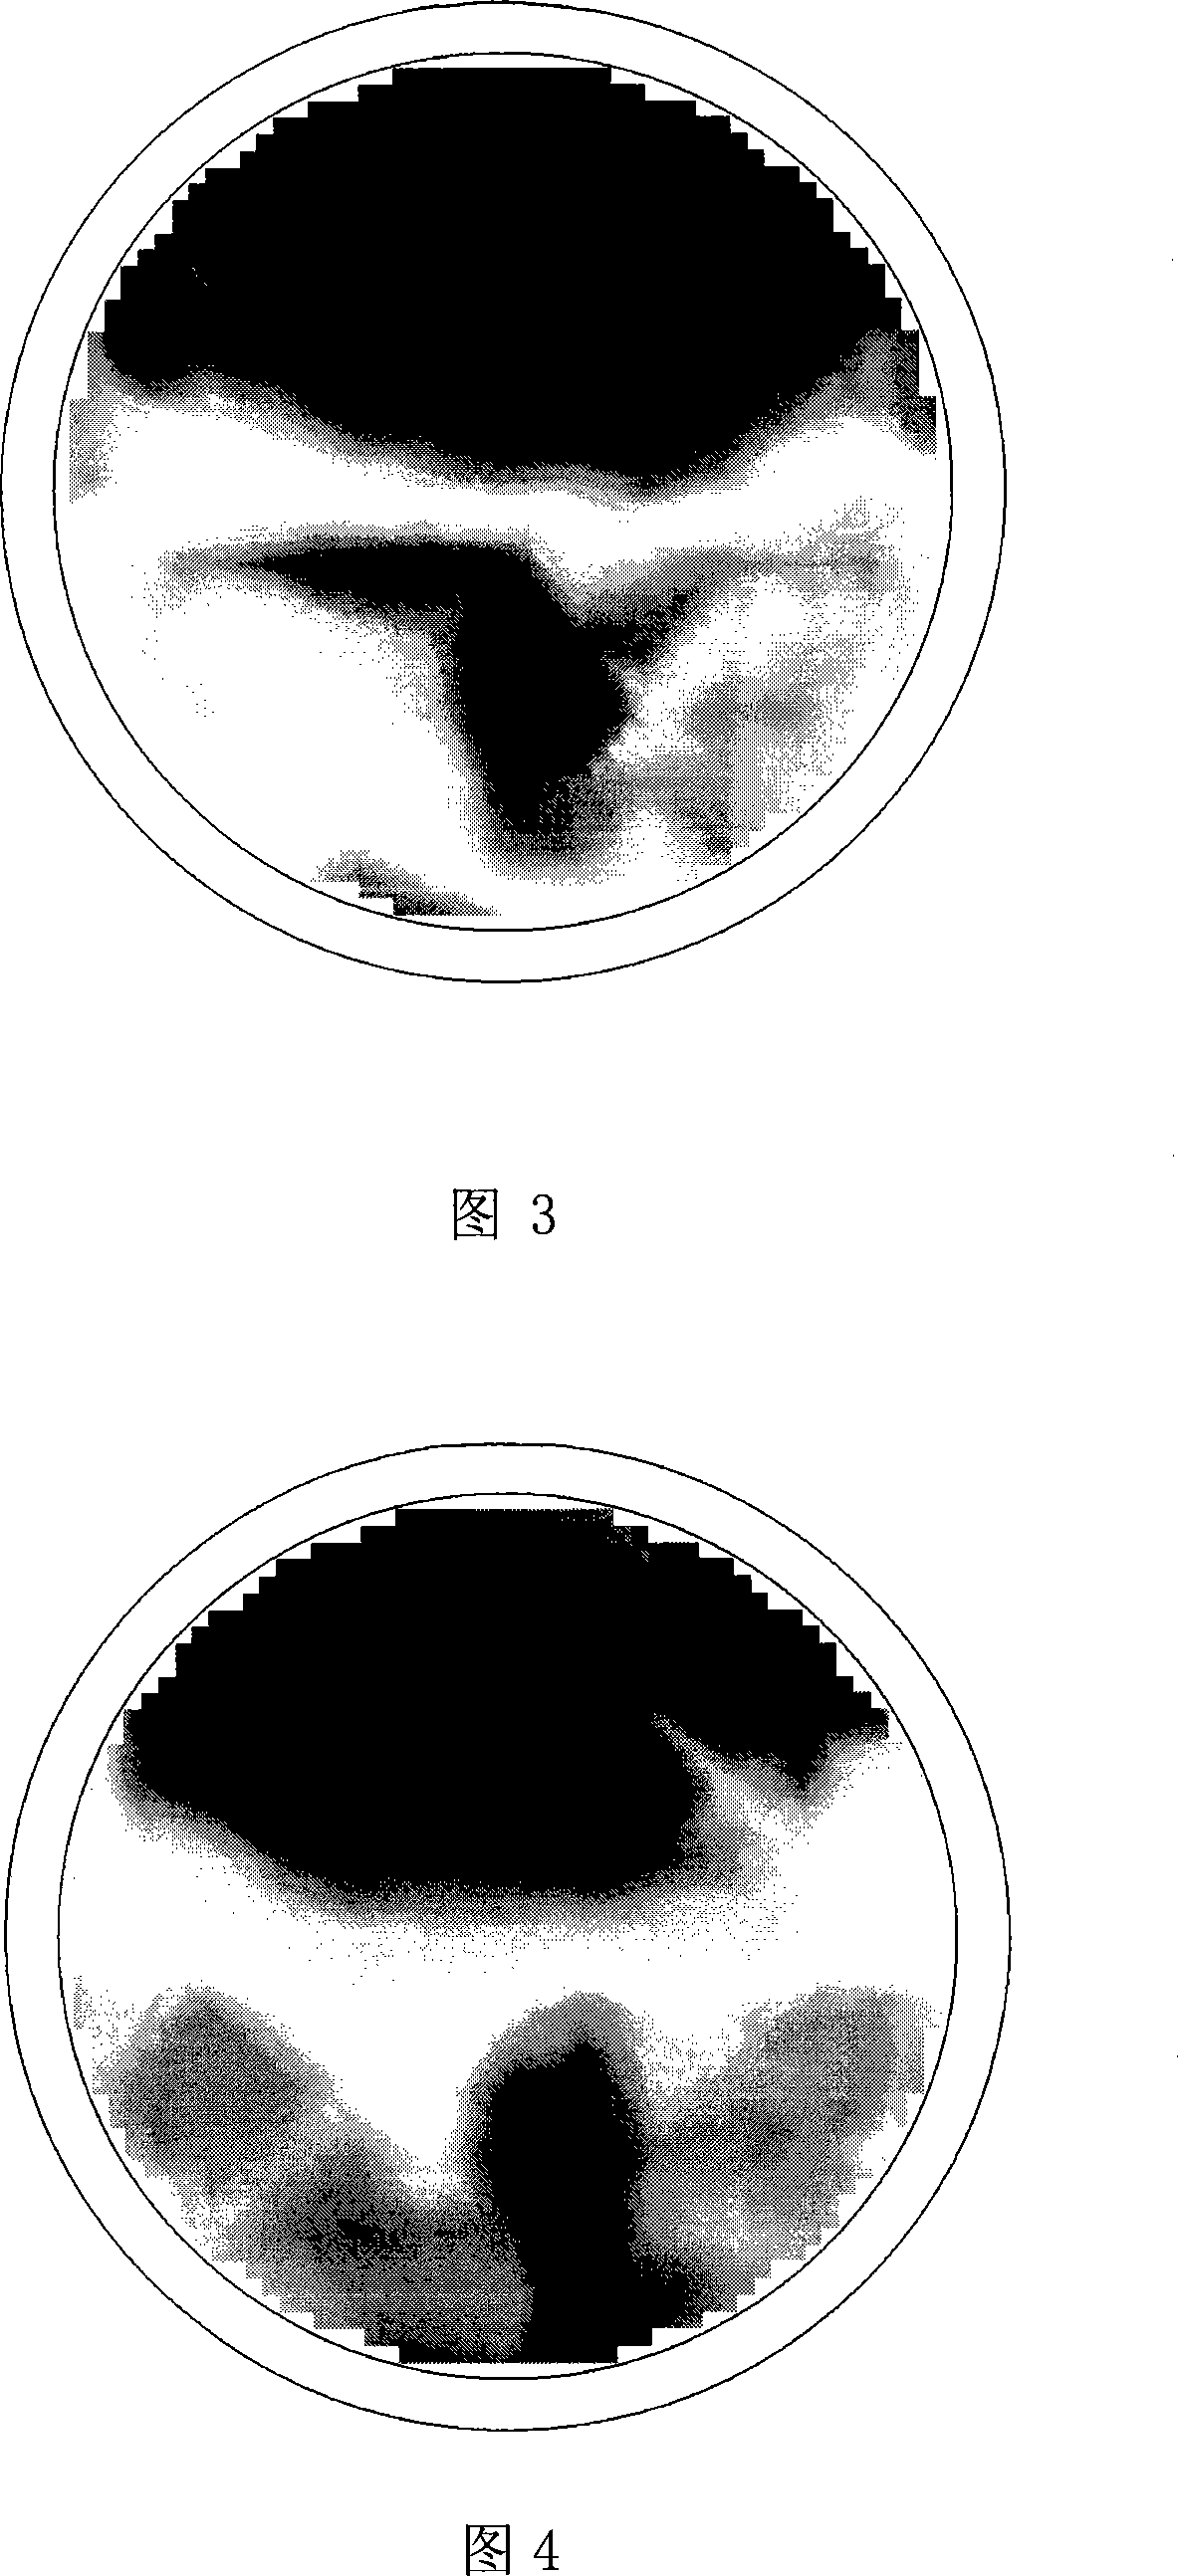 Non-contact type electric impedance sensor and image rebuilding method based on the sensor